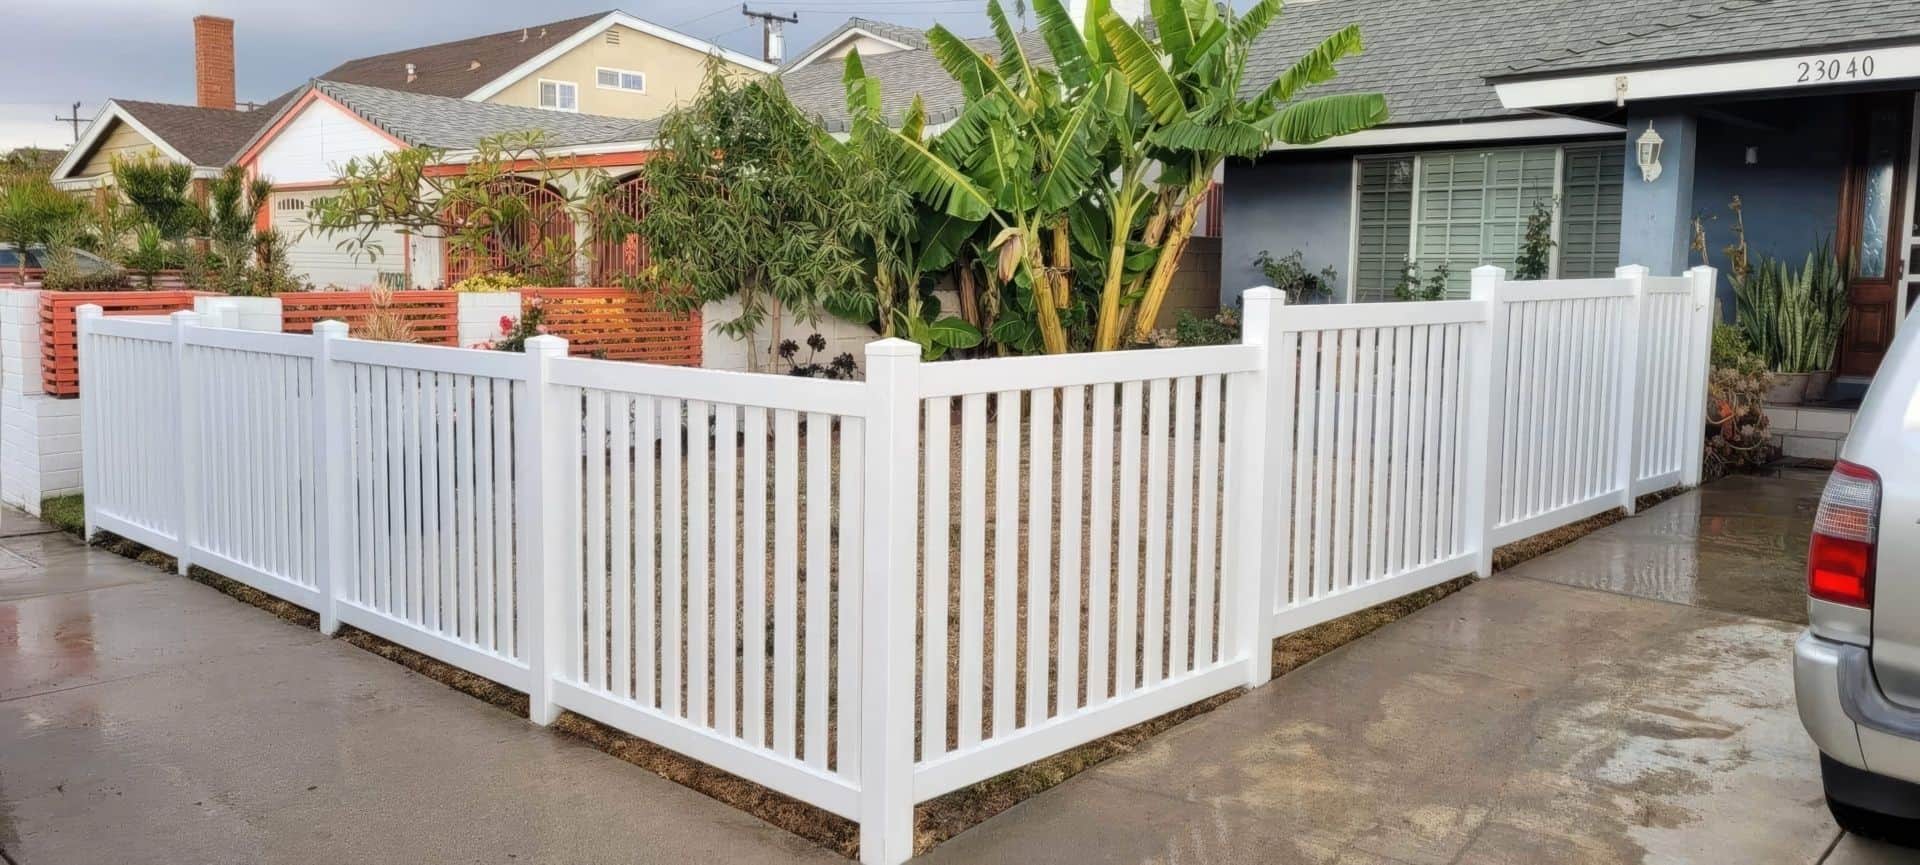 Vinyl picket fence connected to metal chain fence separate the backyard hedge and garden from the concrete sidewalk